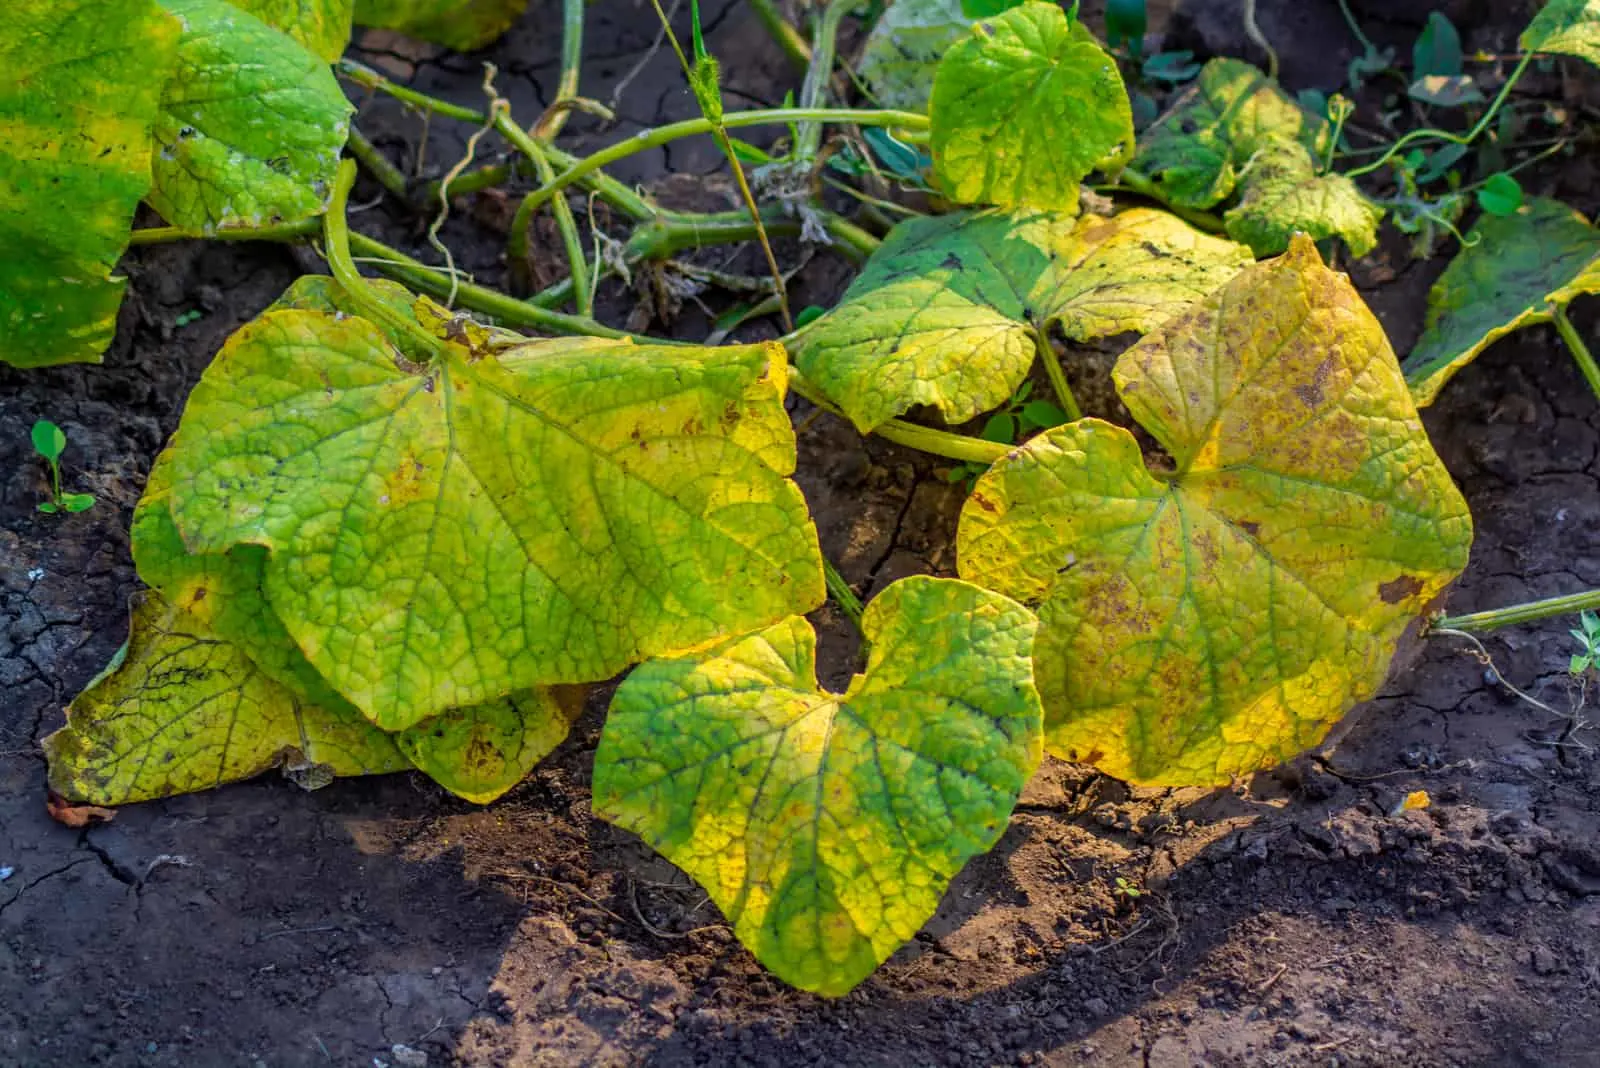 Disease on the cucumber plant in the garden